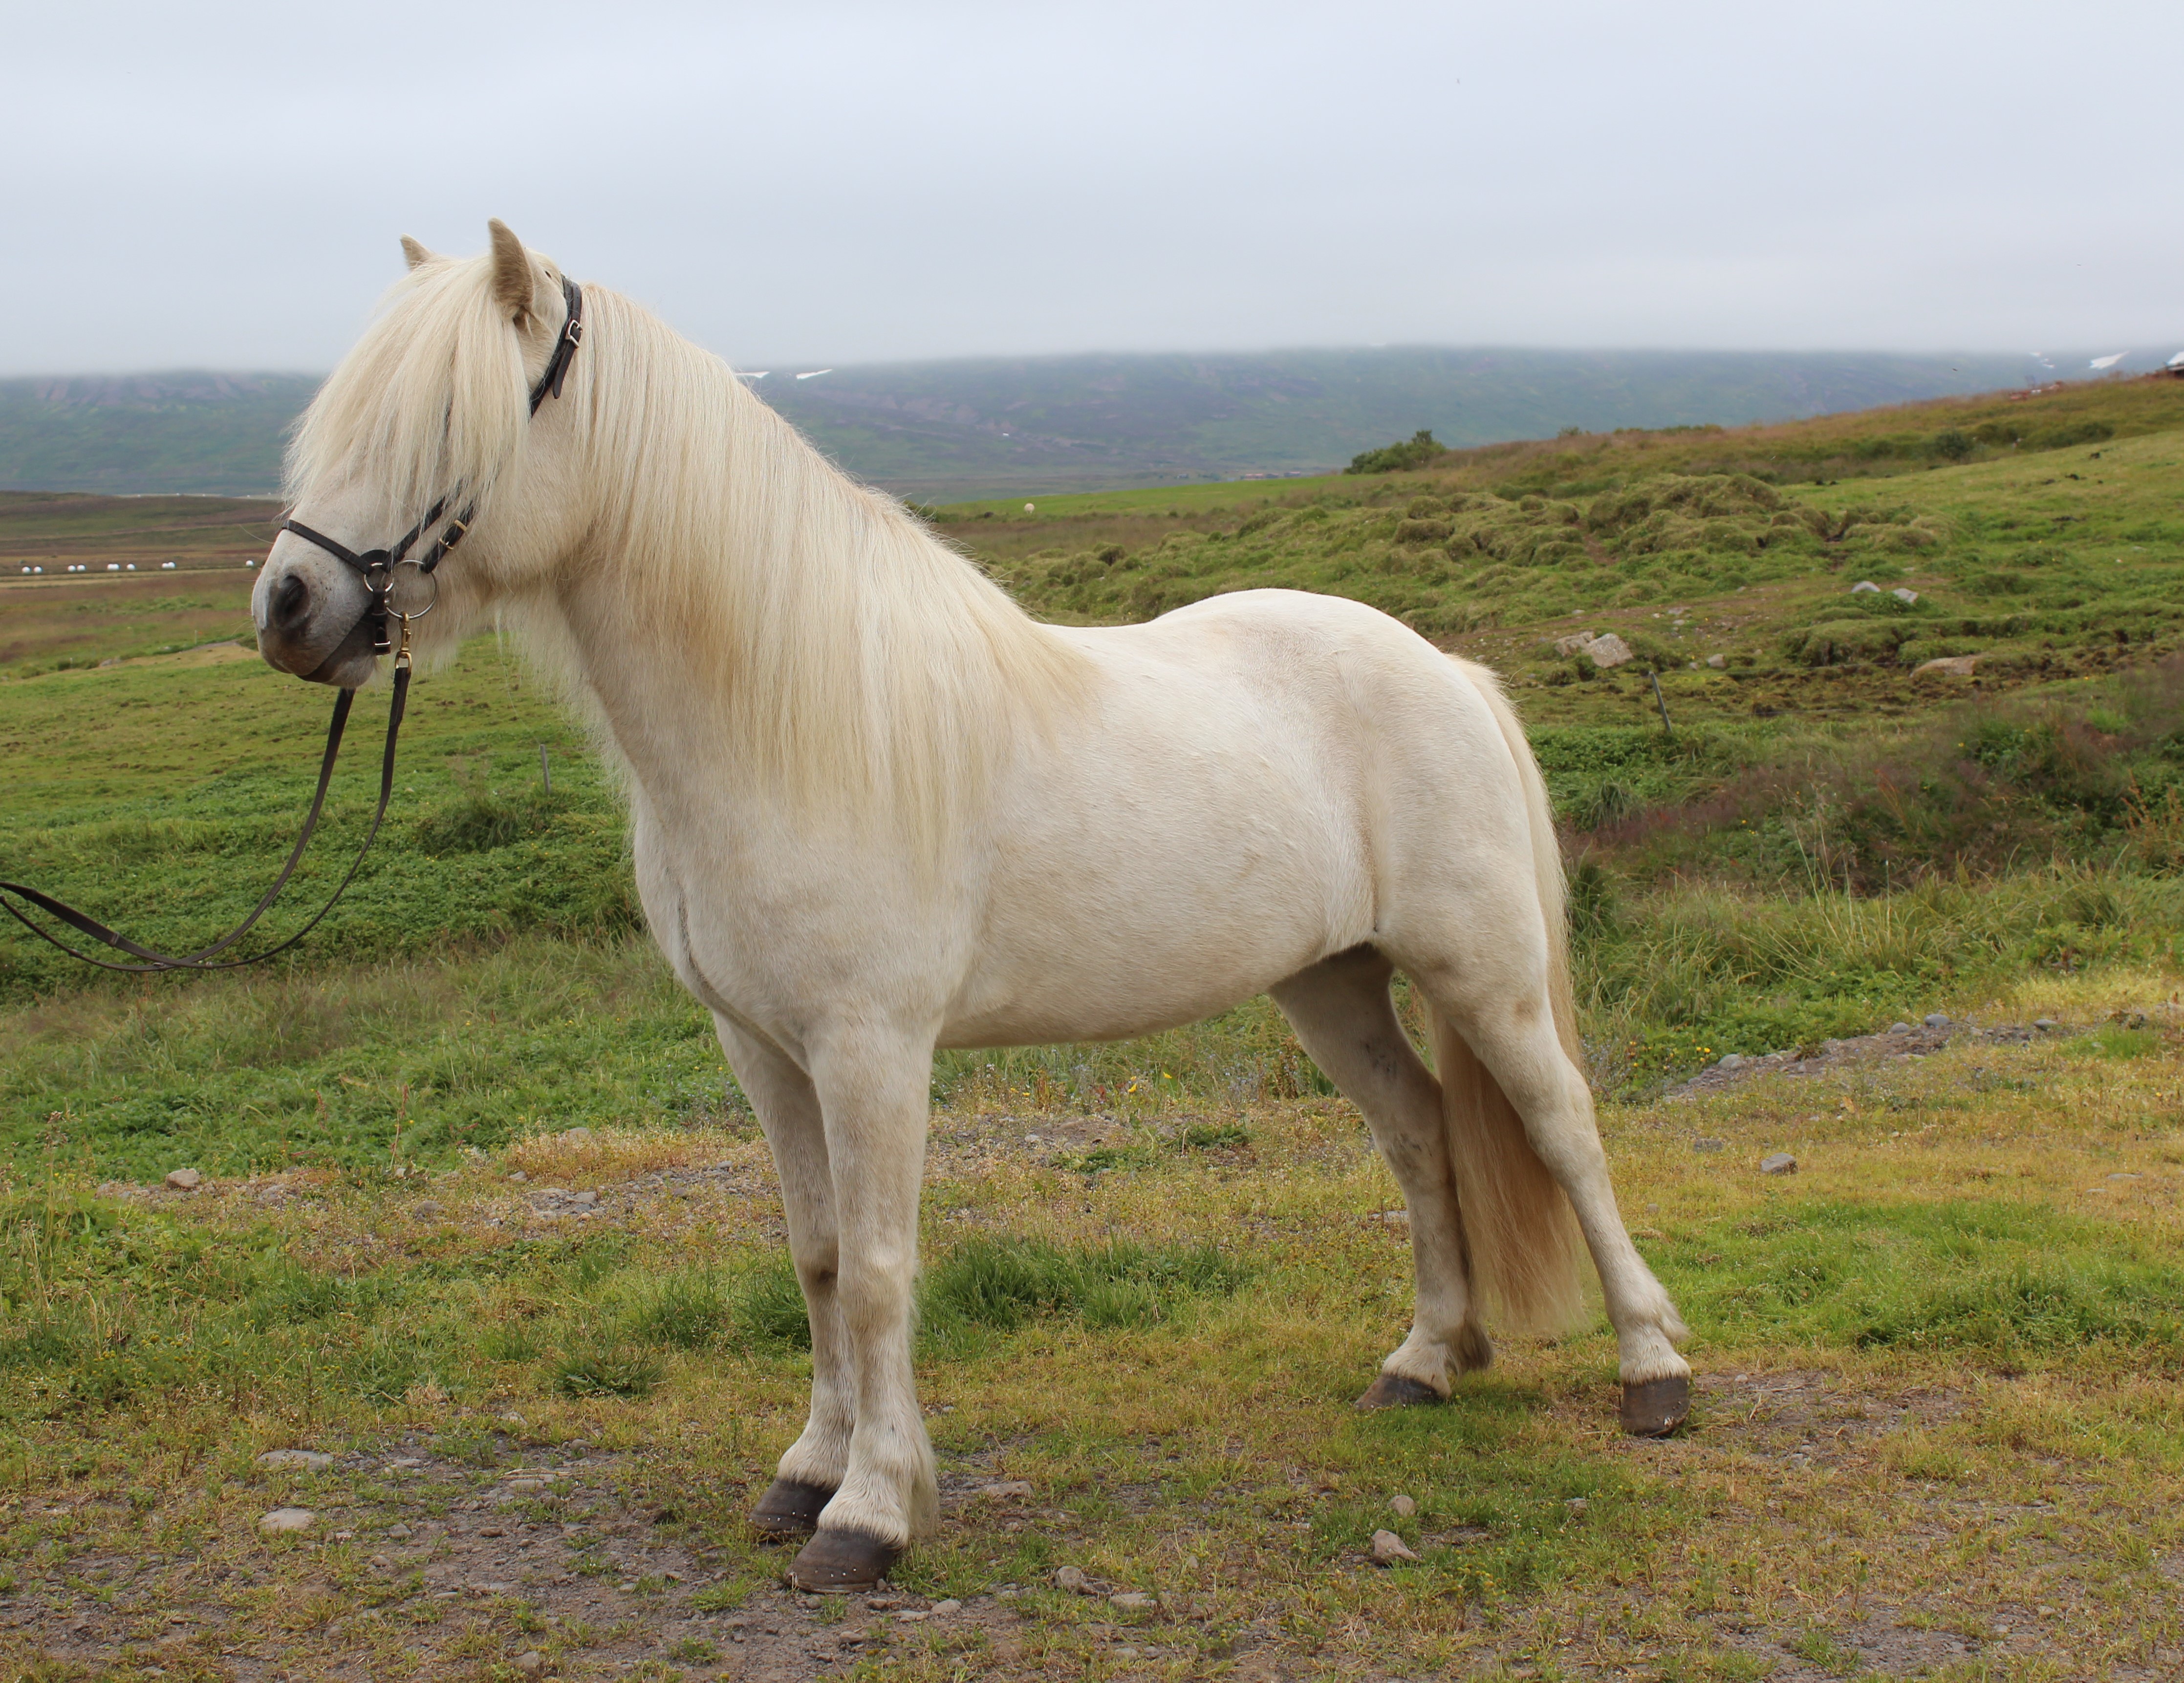 We have horses for sale – contact us for info